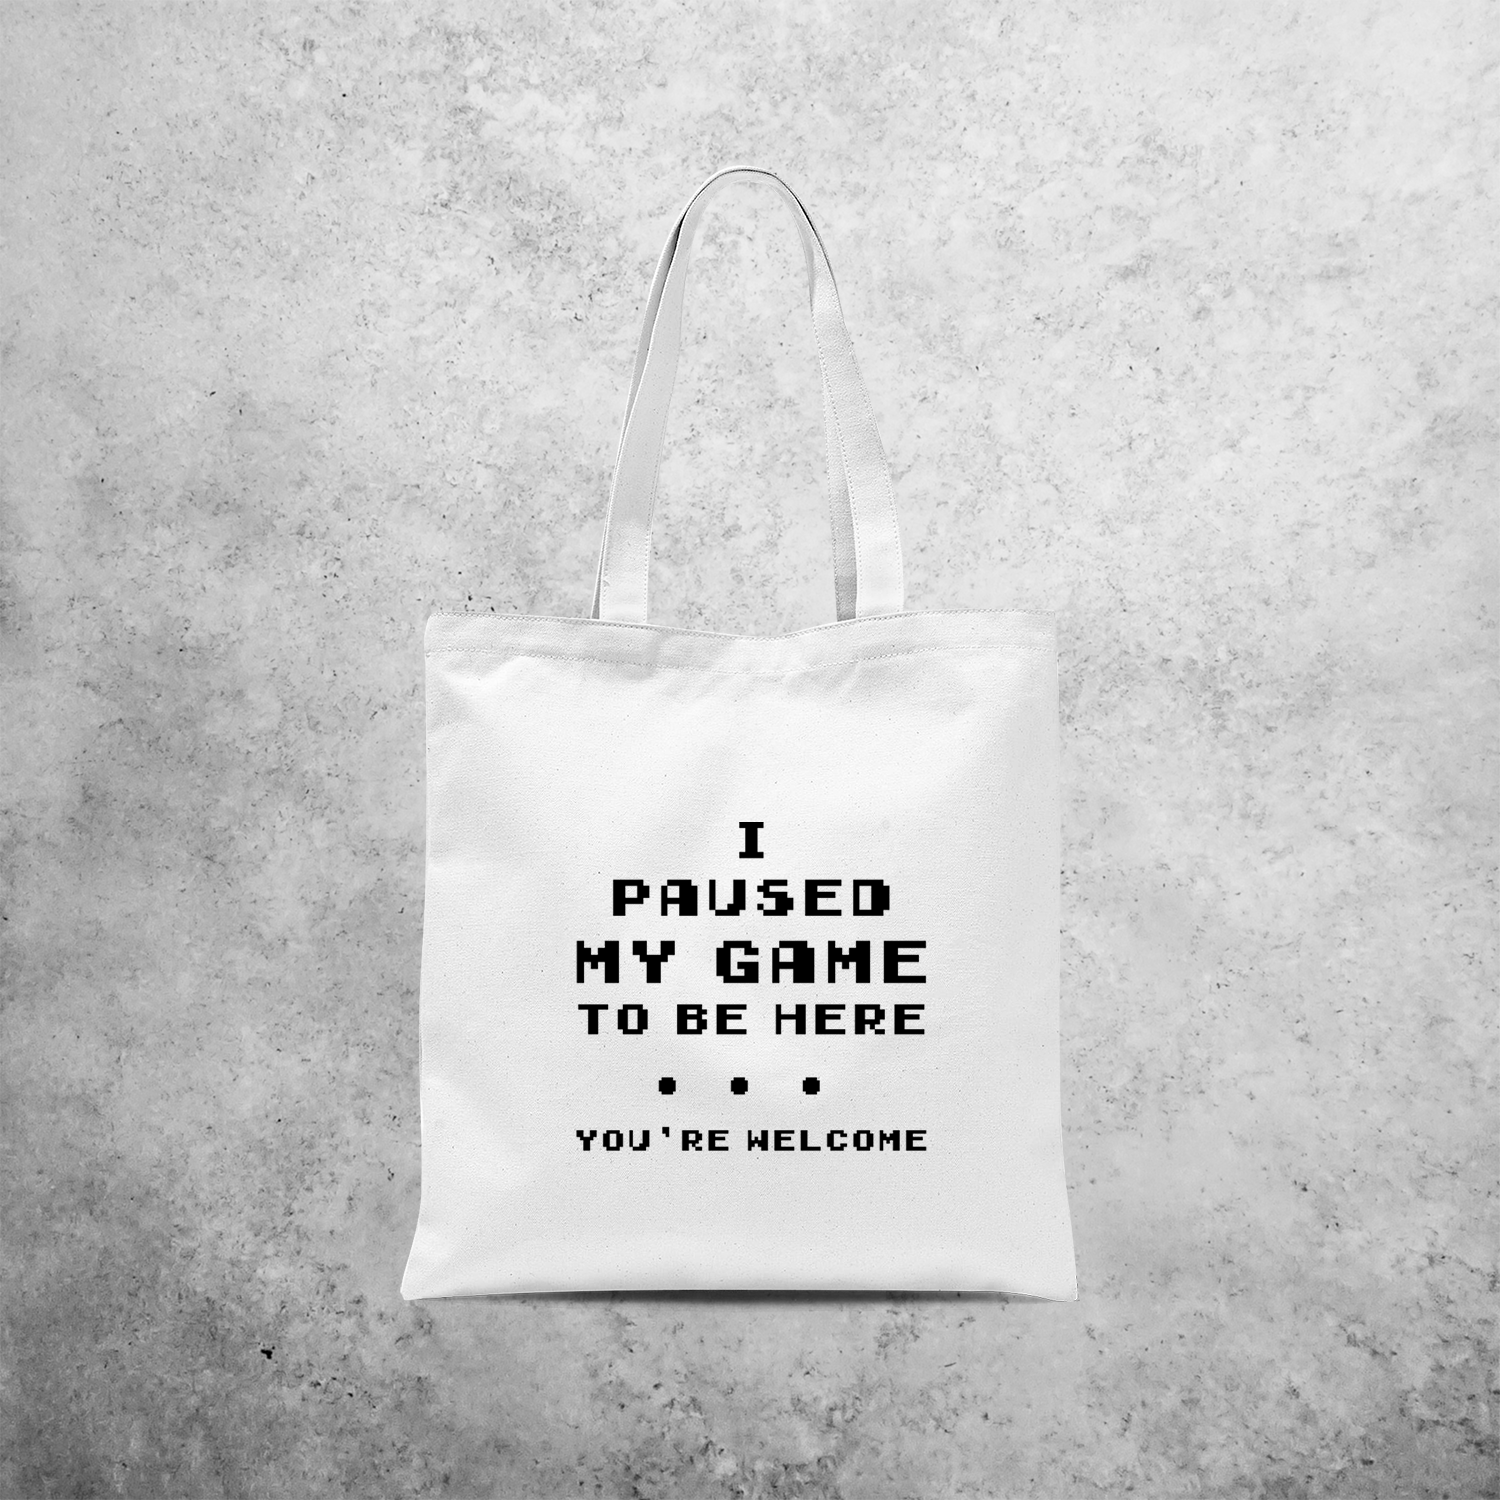 'I paused my game to be here - You're welcome' tote bag